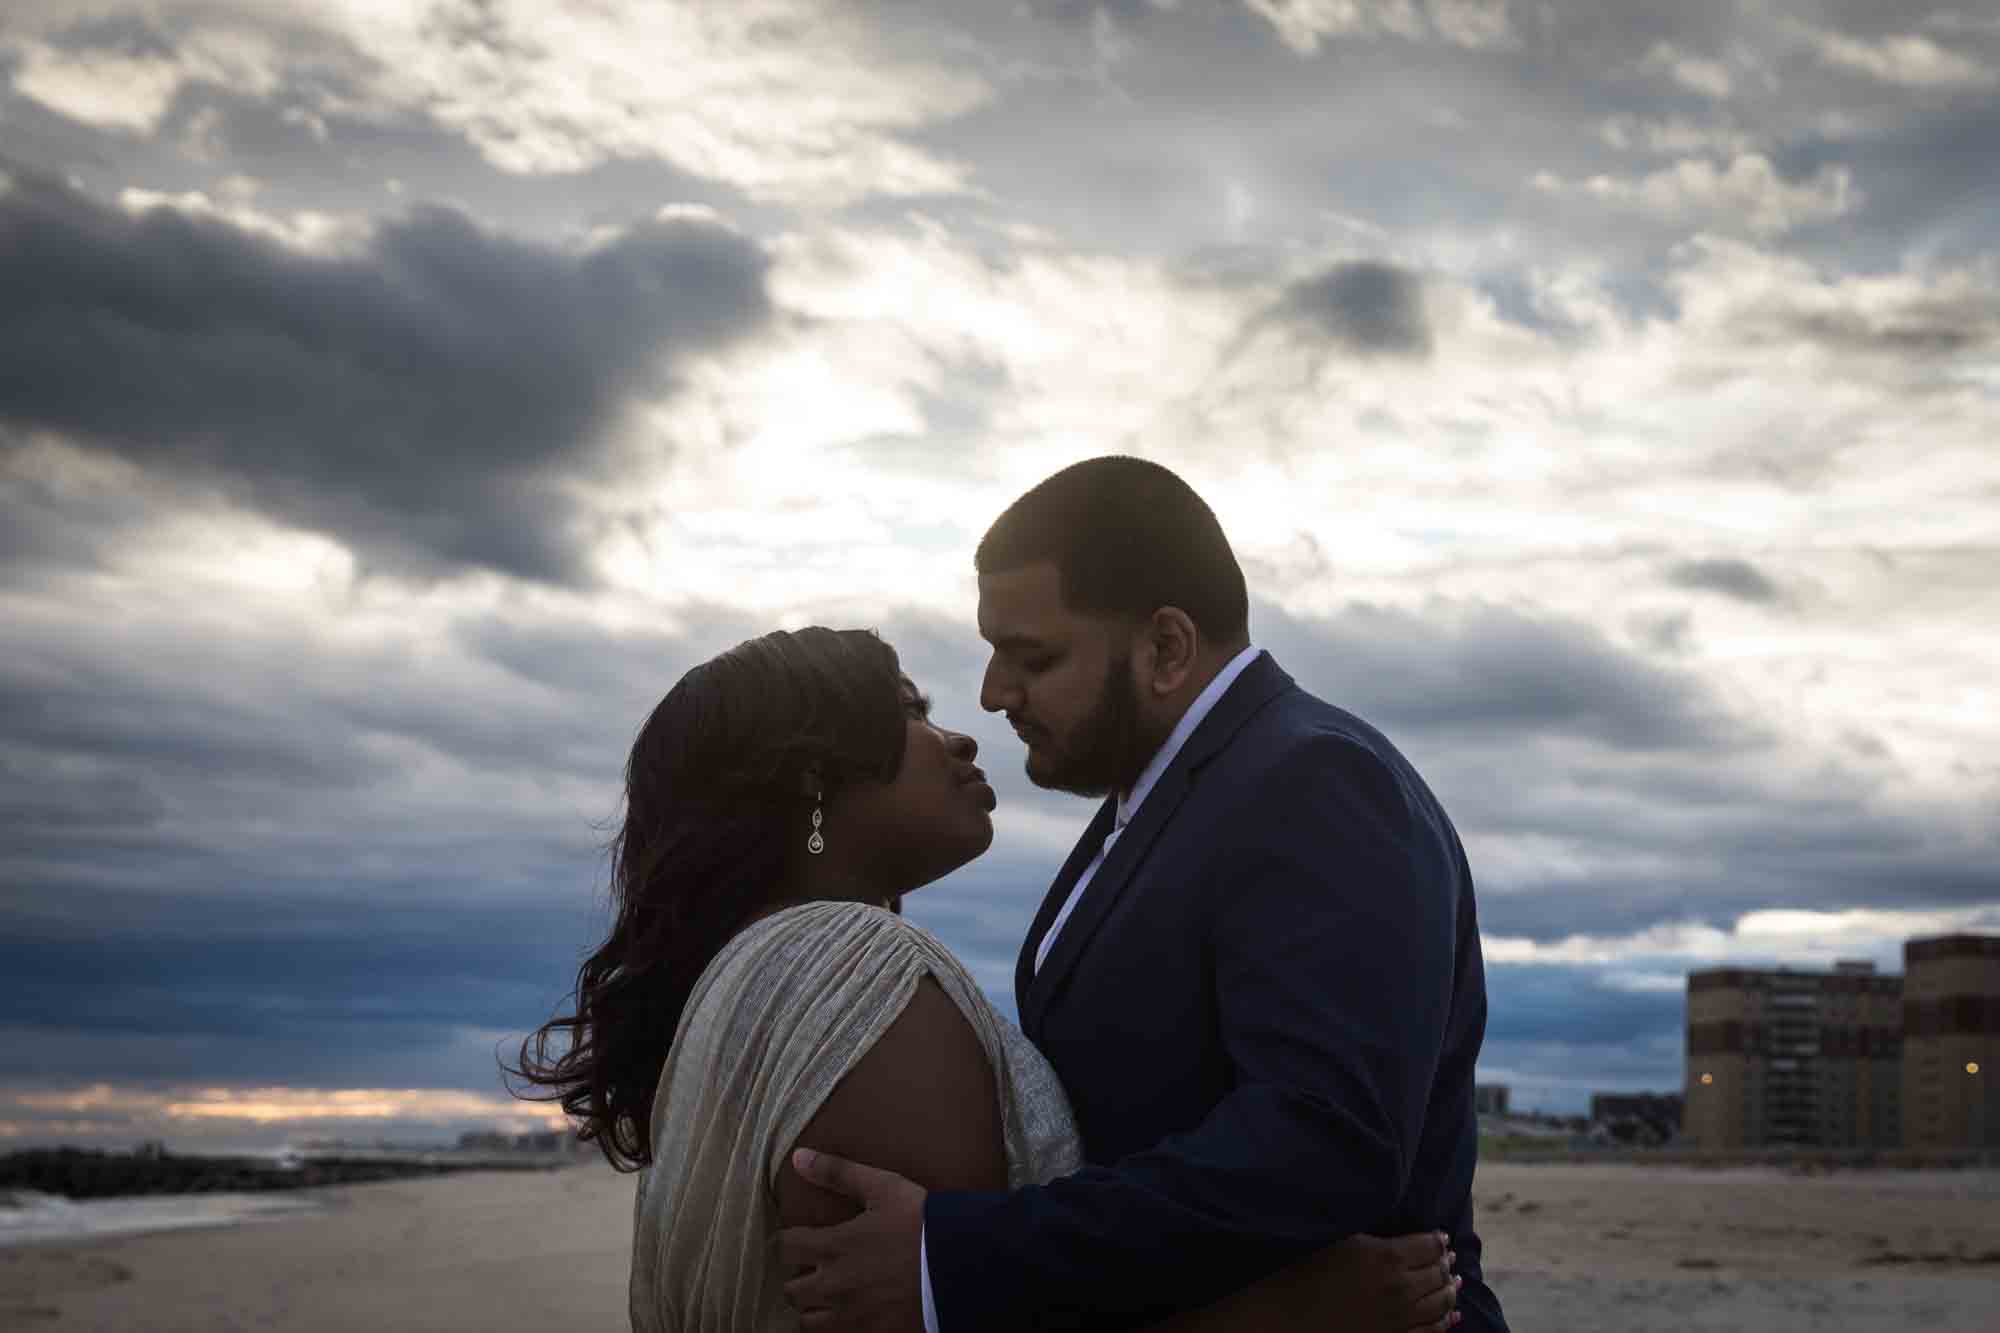 Couple about to kiss backlit against cloudy sky